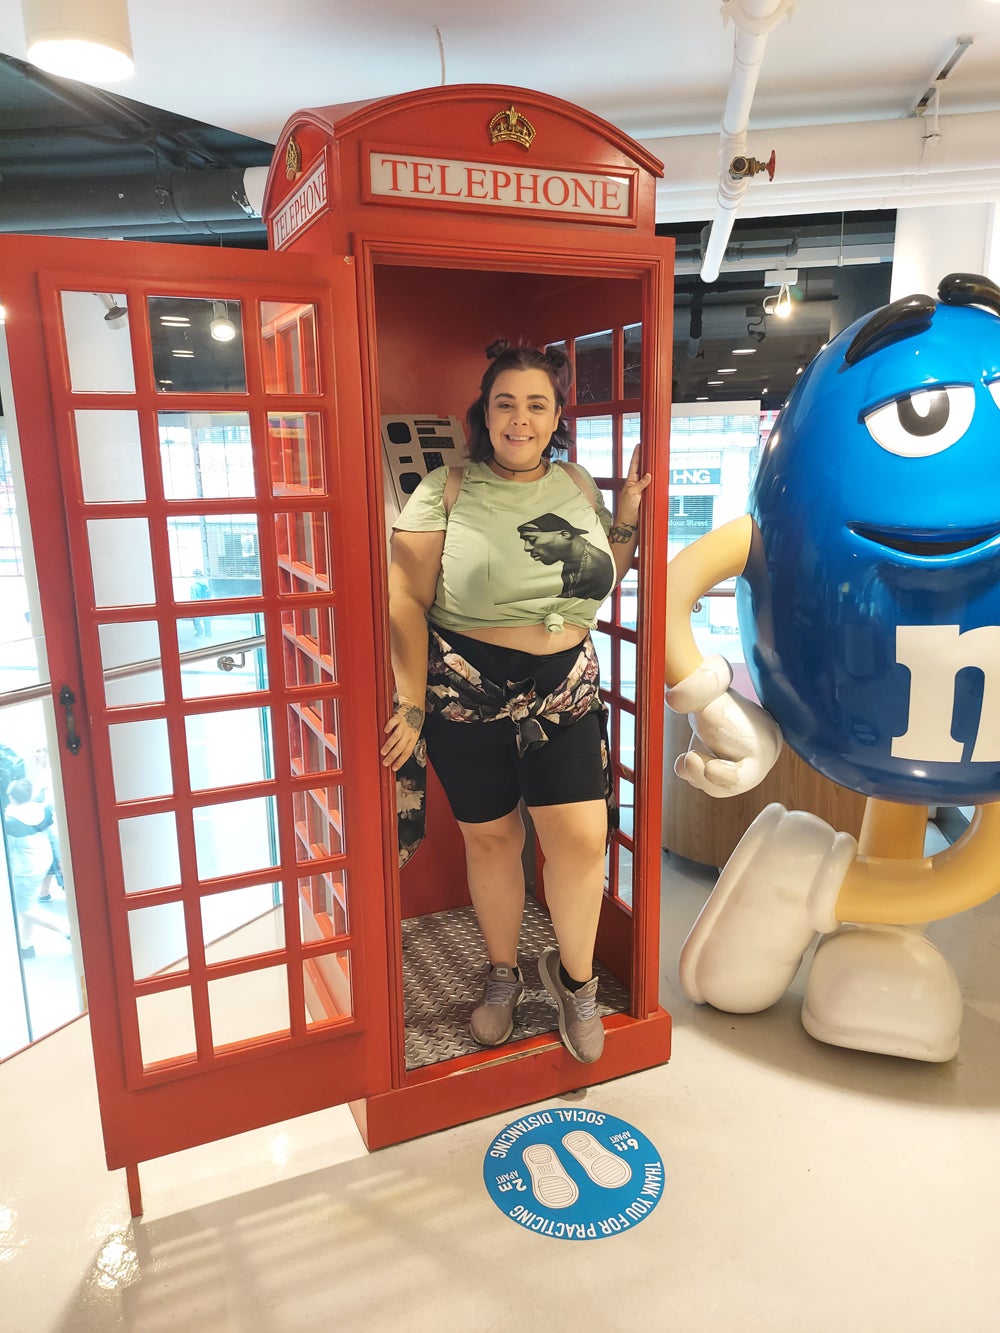 Laura O’Sullivan, 32, at M&M World in London (Collect/PA Real Life)